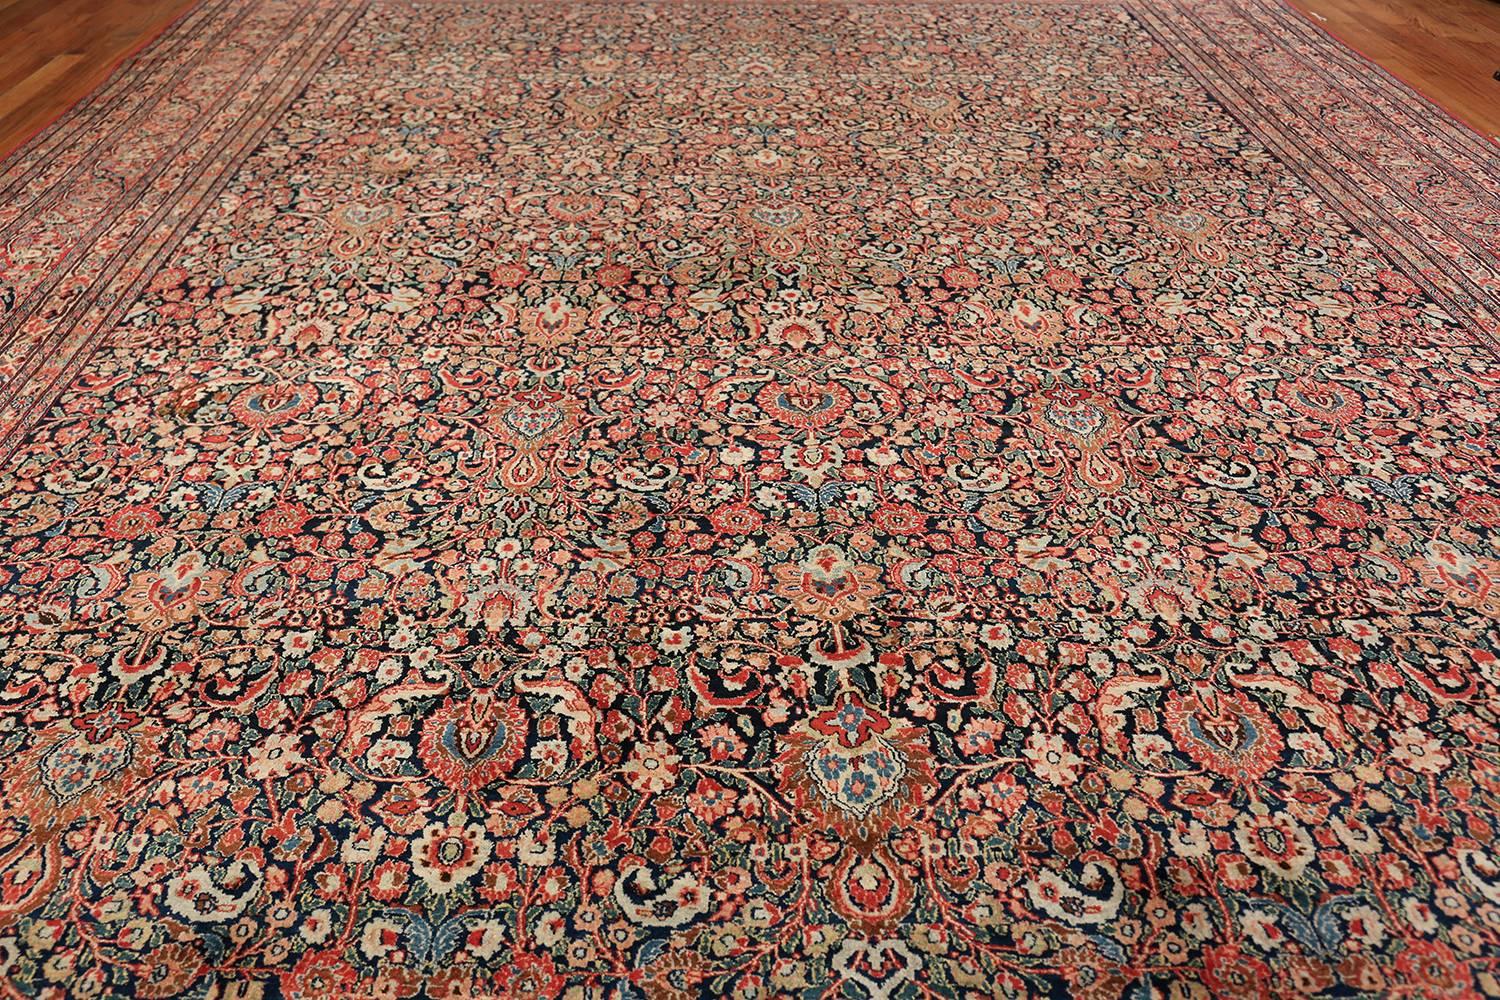 Hand-Knotted Antique Persian Khorassan Rug. Size: 13' 3